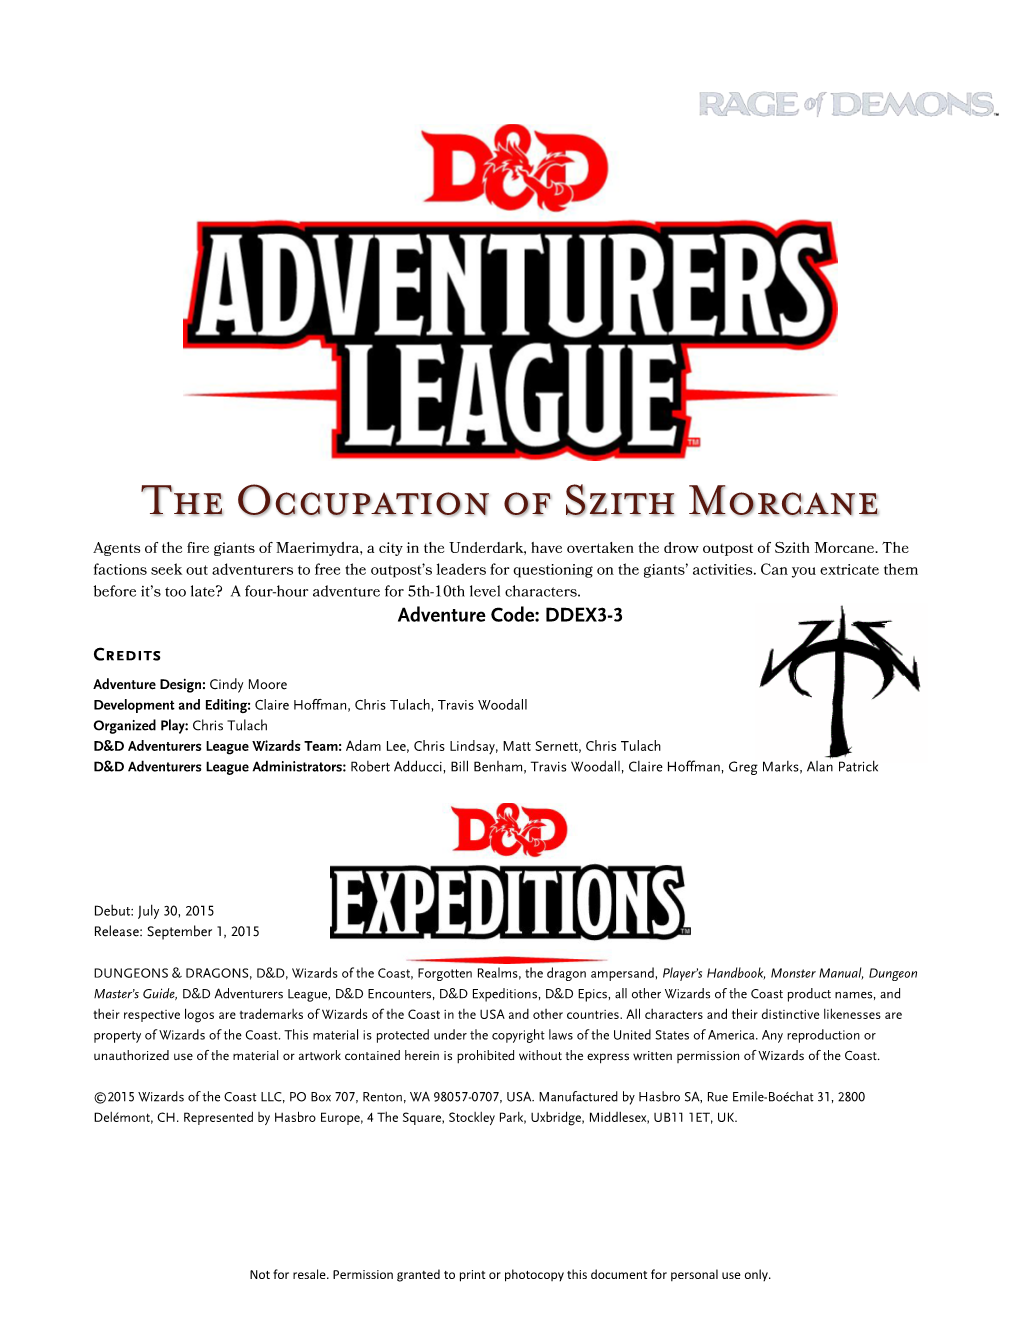 The Occupation of Szith Morcane